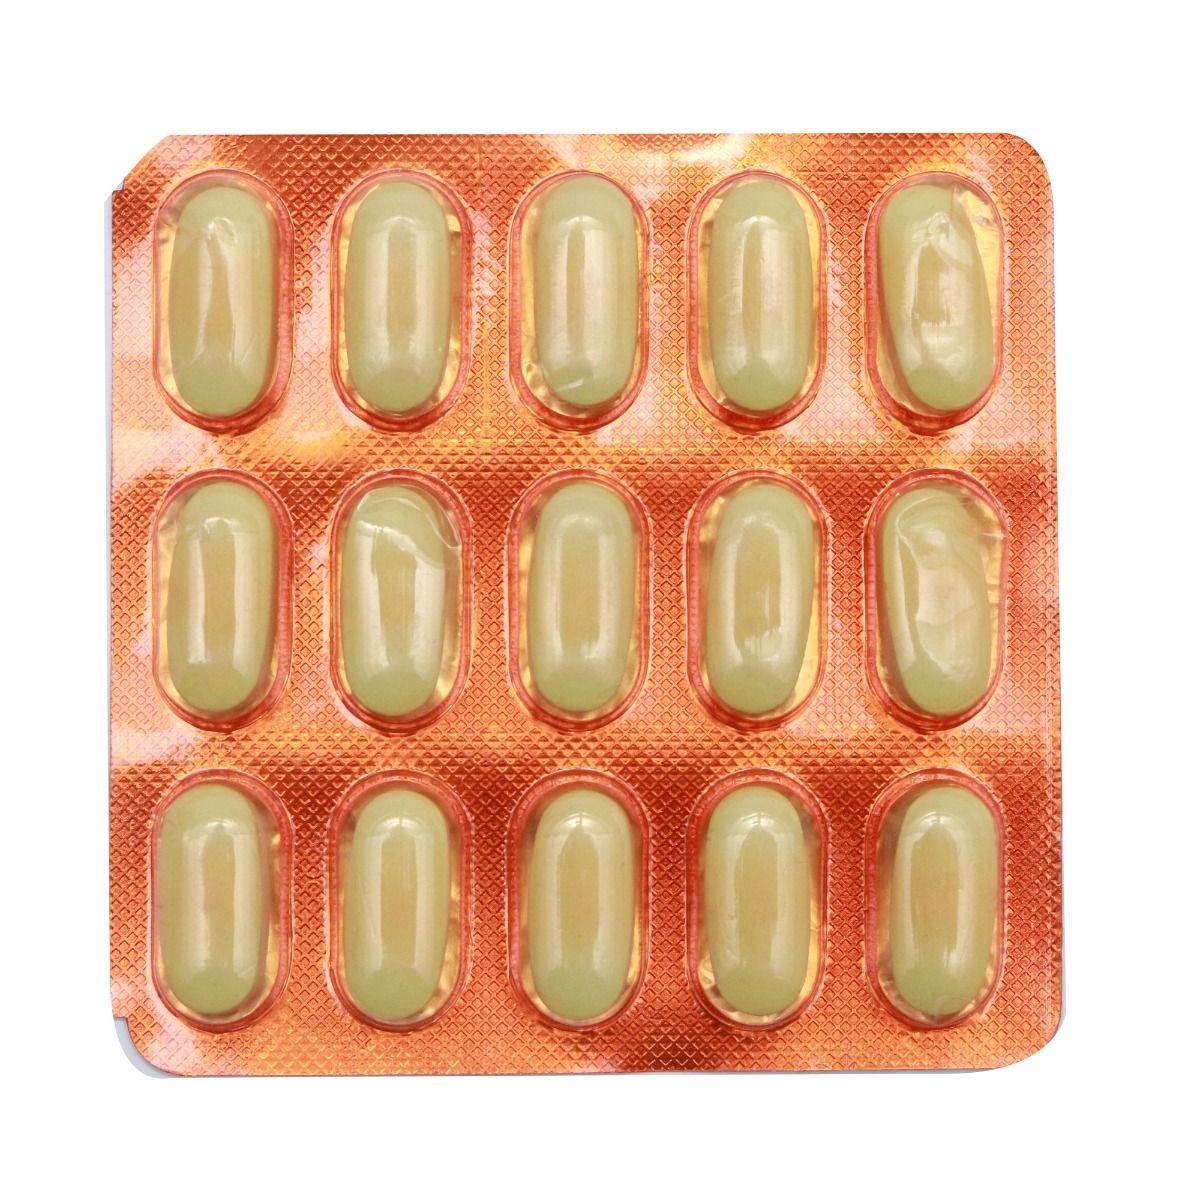 OCIUM 500MG TABLET, Pack of 15 TABLETS